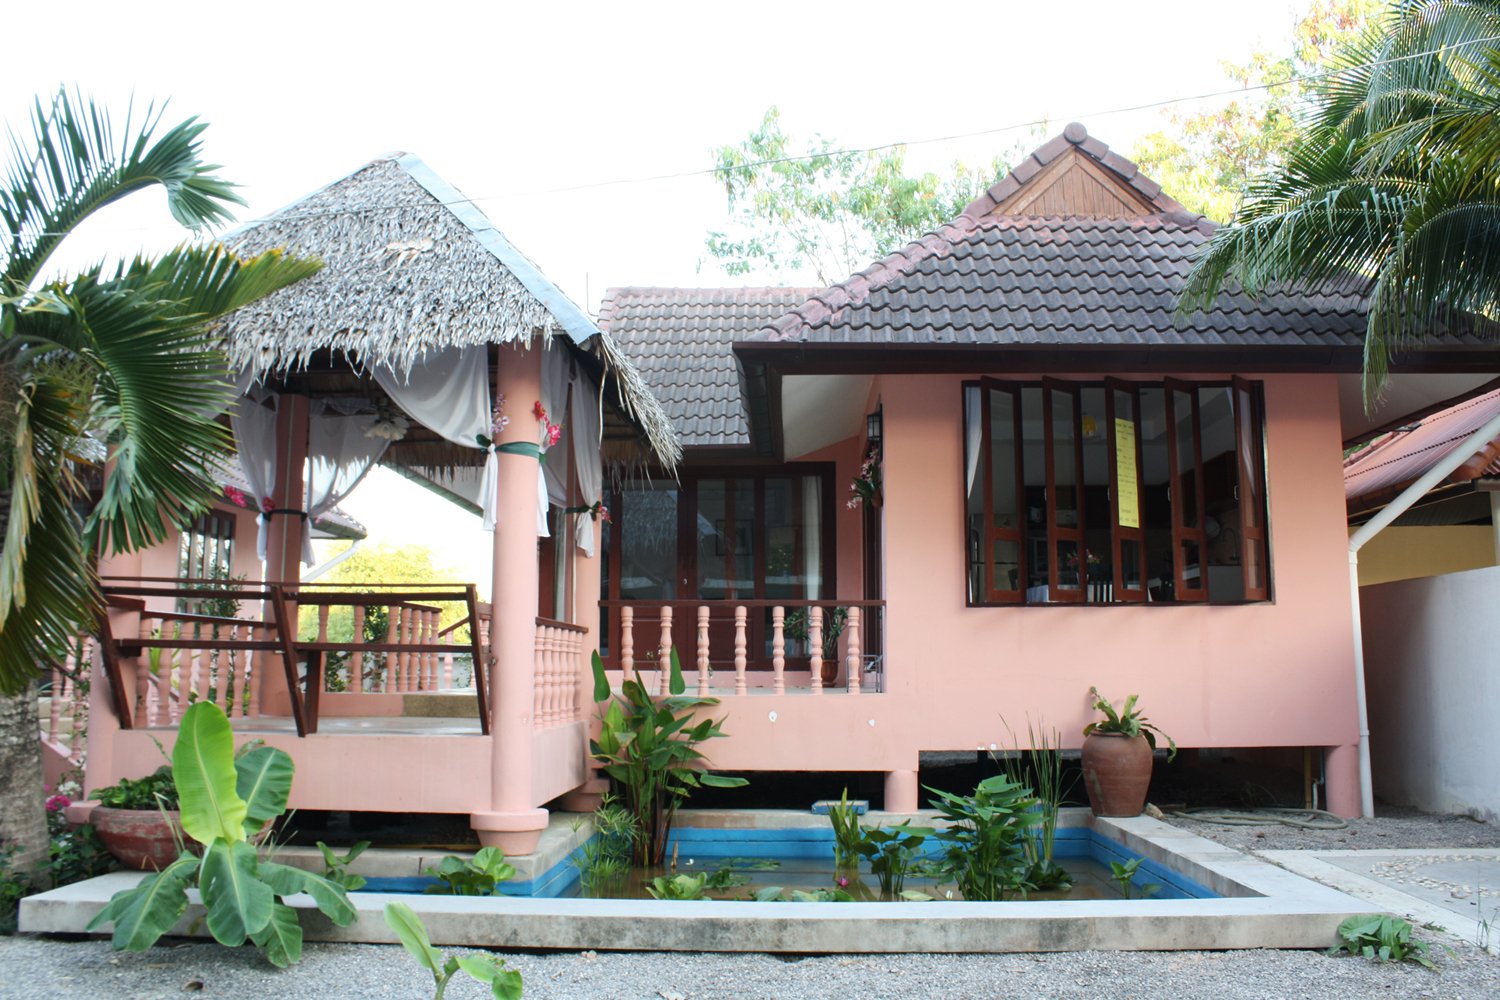 Villa one bed and one bathroom in Rawai Phuket